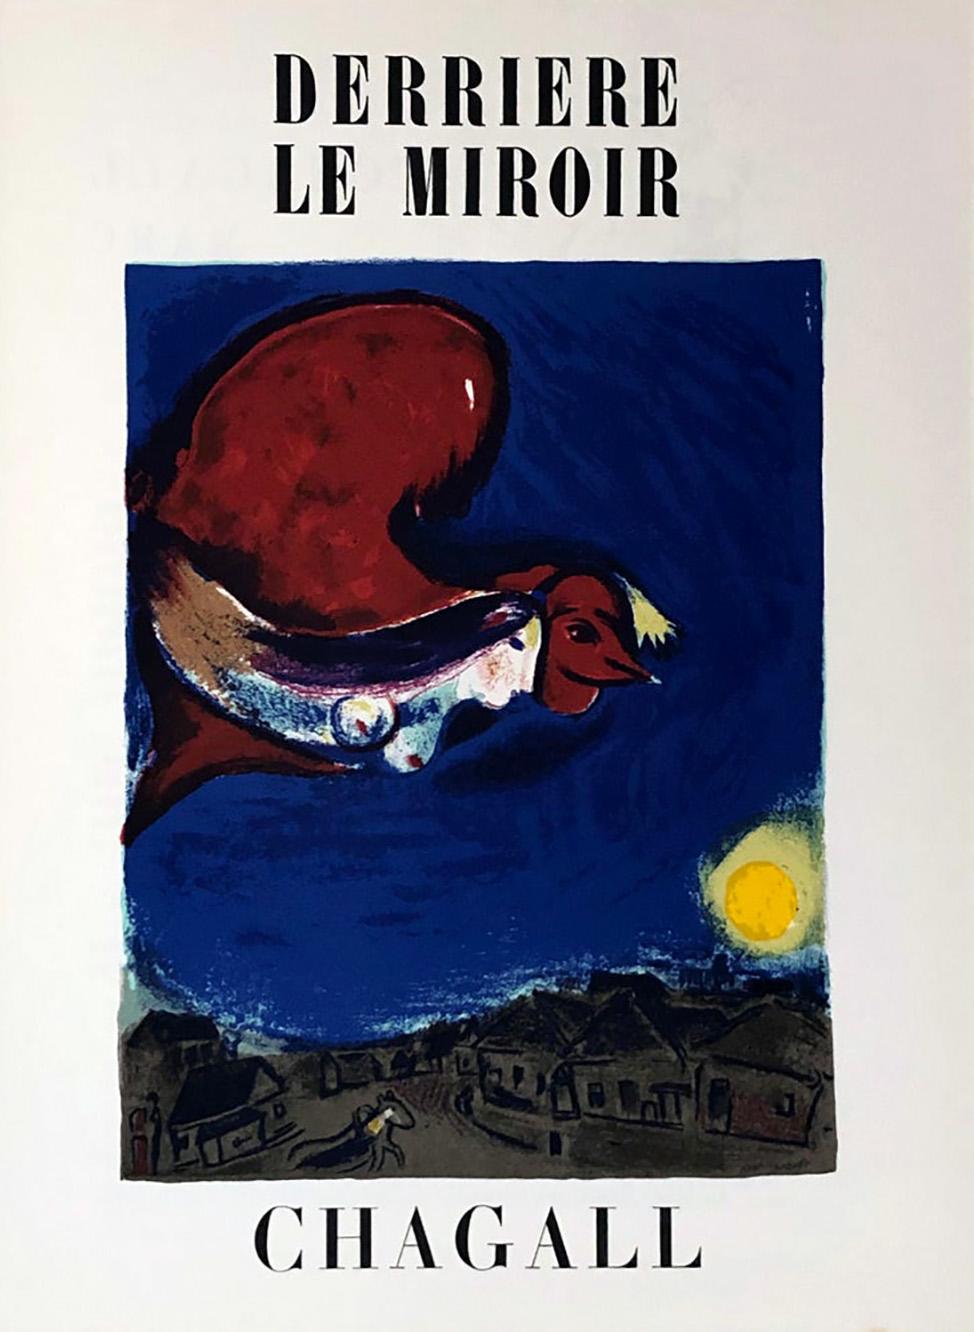 Marc Chagall Derrière le miroir  1950
Lithograph in colors published by: Galerie Maeght, Paris, 1950
Fine condition and rare as such. 

Cover: 11 x 15 inches, Larger lithograph: 15 x 22 inches; center fold-line as issued; otherwise excellent